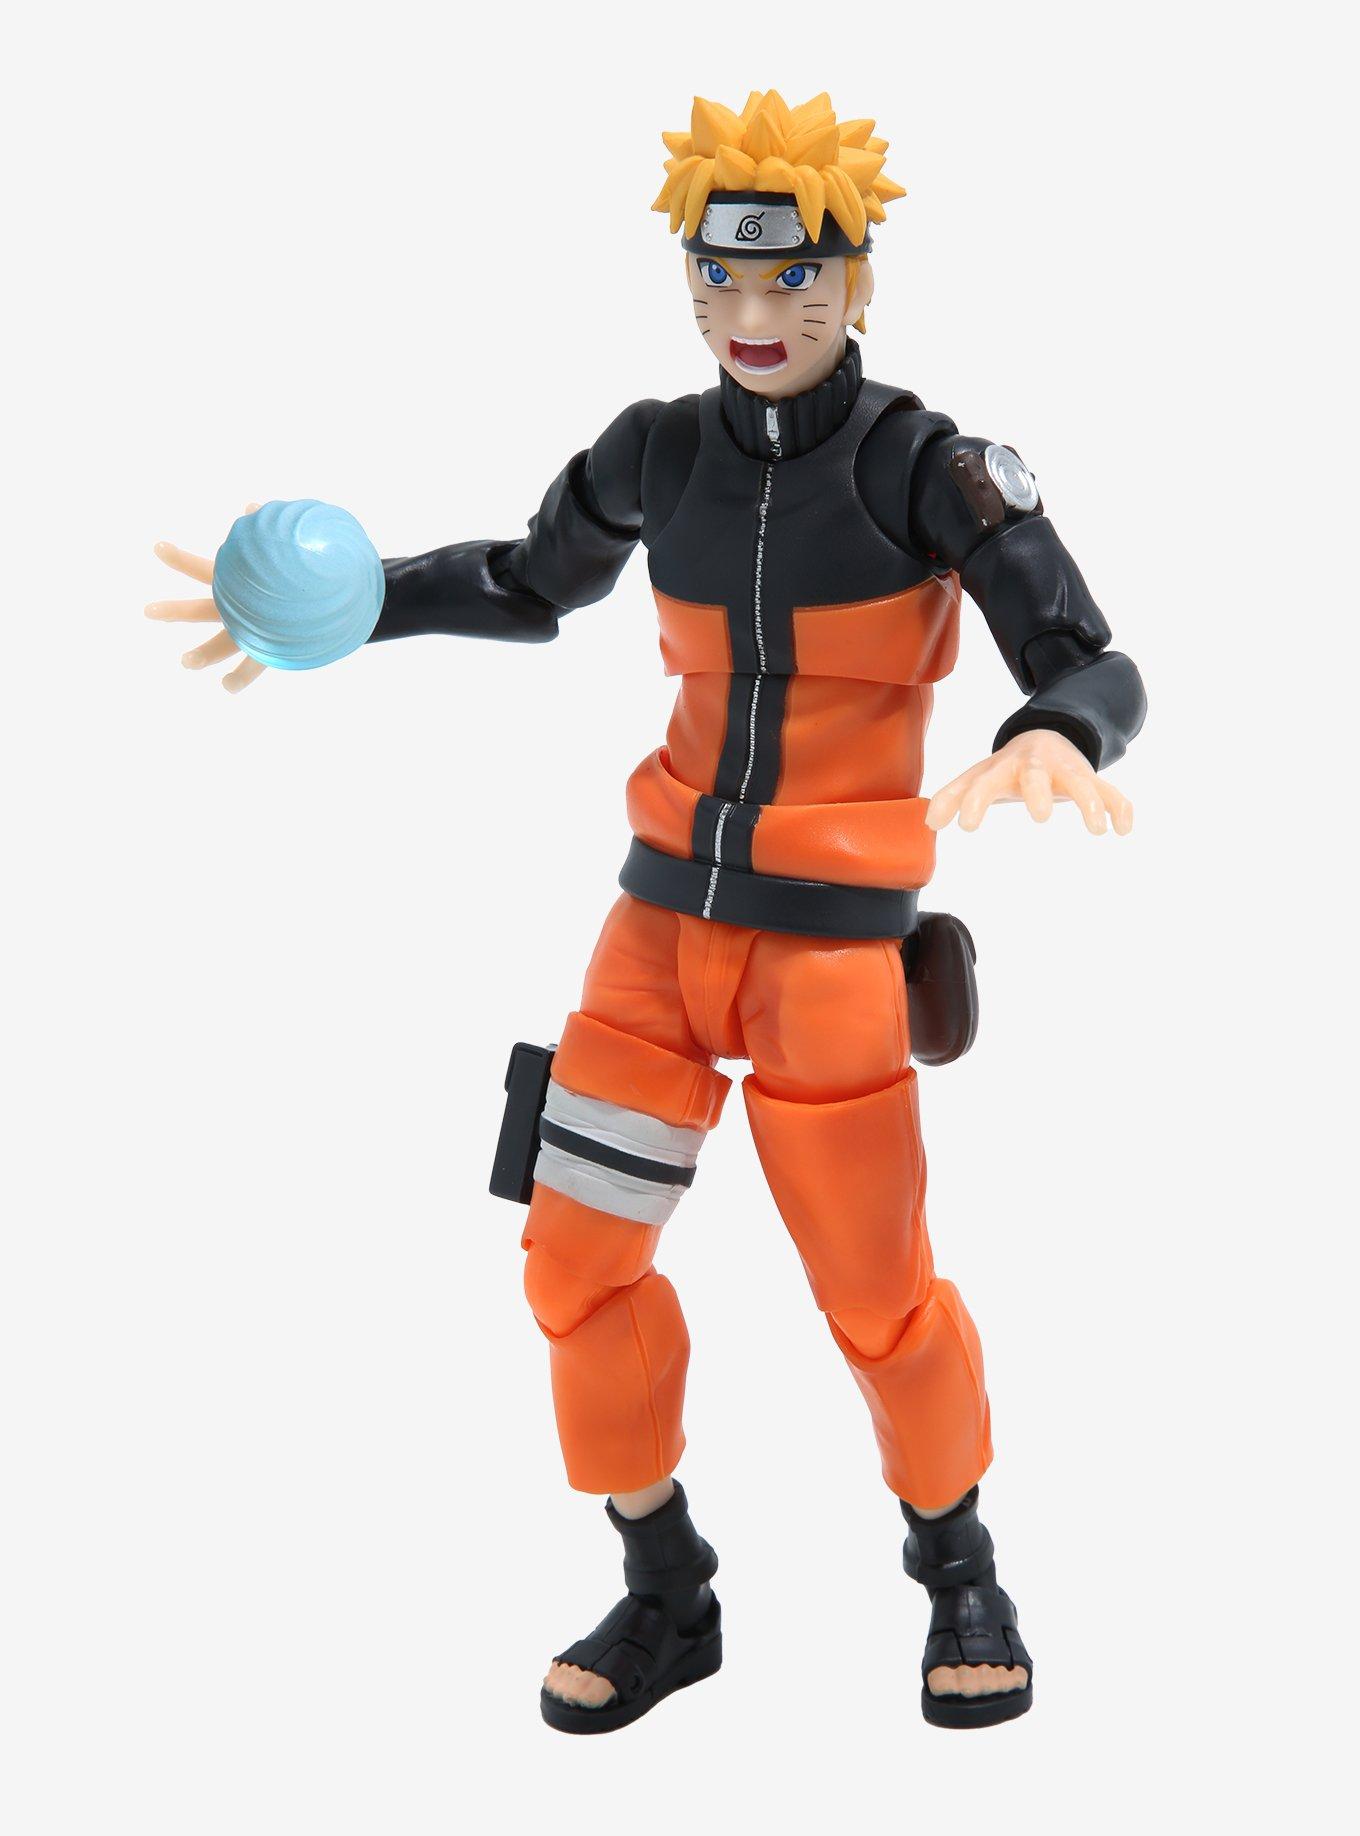 Bandai Naruto Shippuden Great Posing Figure Mystery Pack - Shop Action  Figures & Dolls at H-E-B